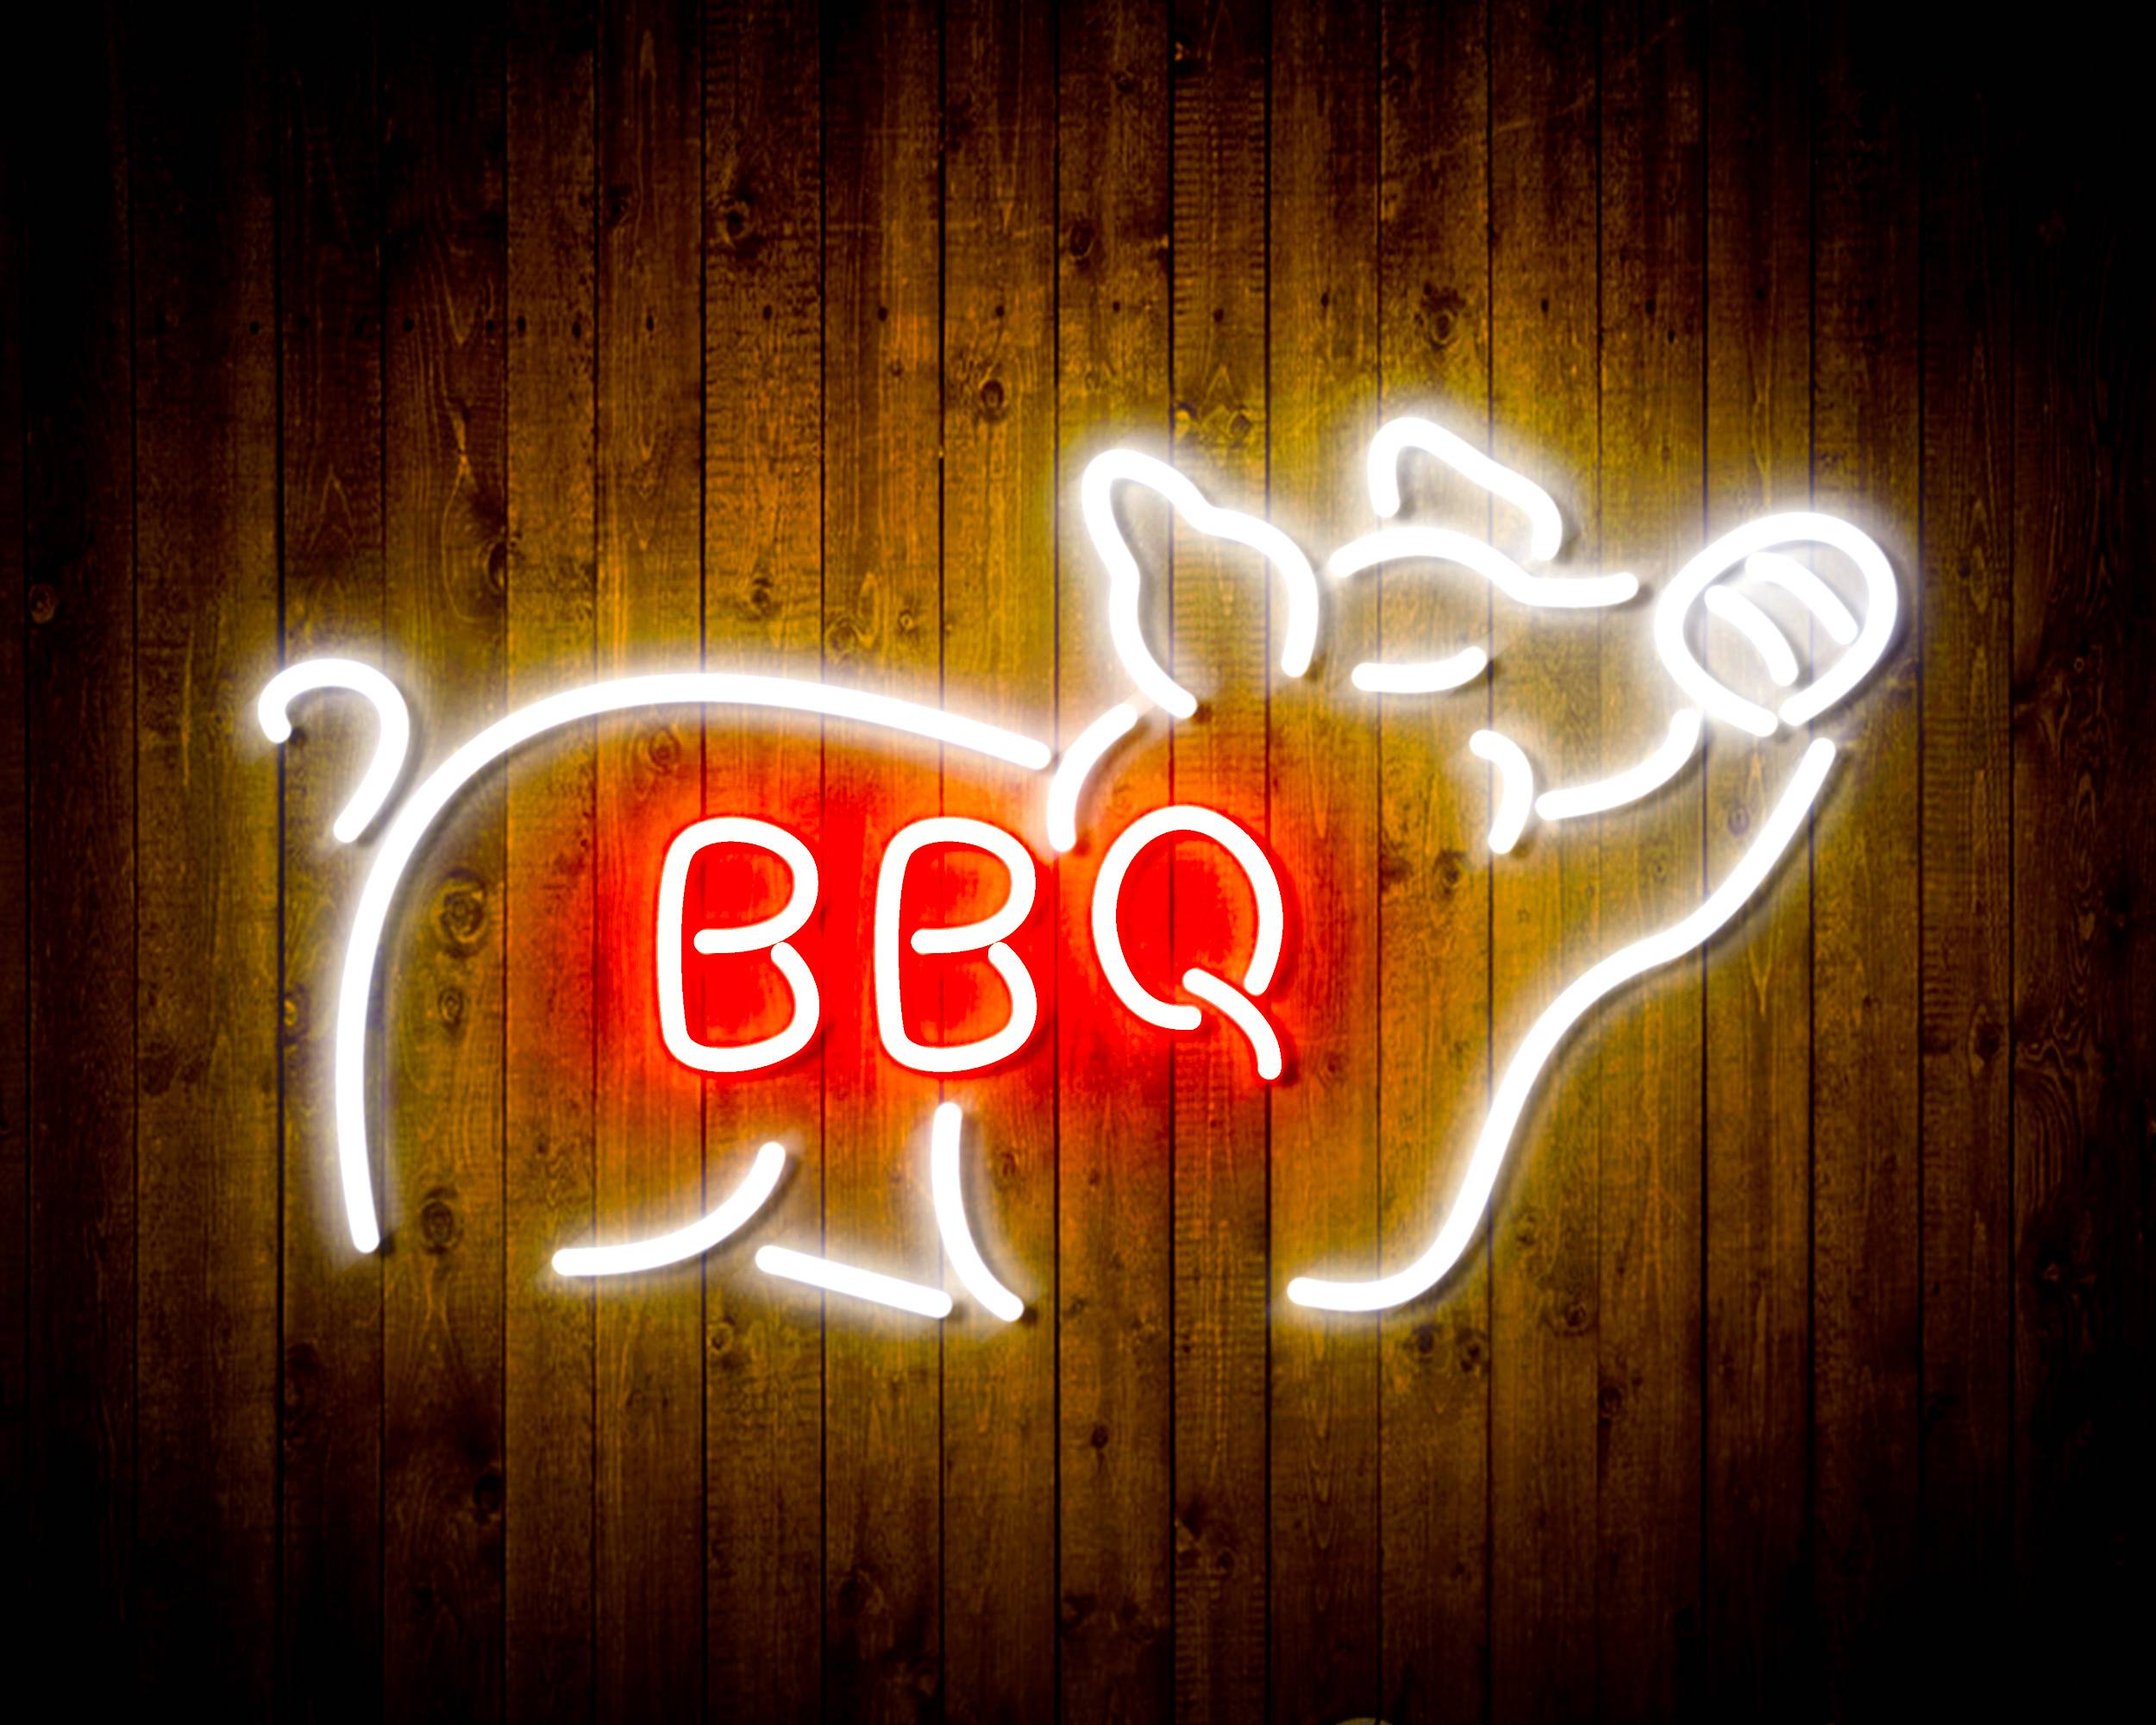 Budweiser with Pig Bar Neon LED Sign